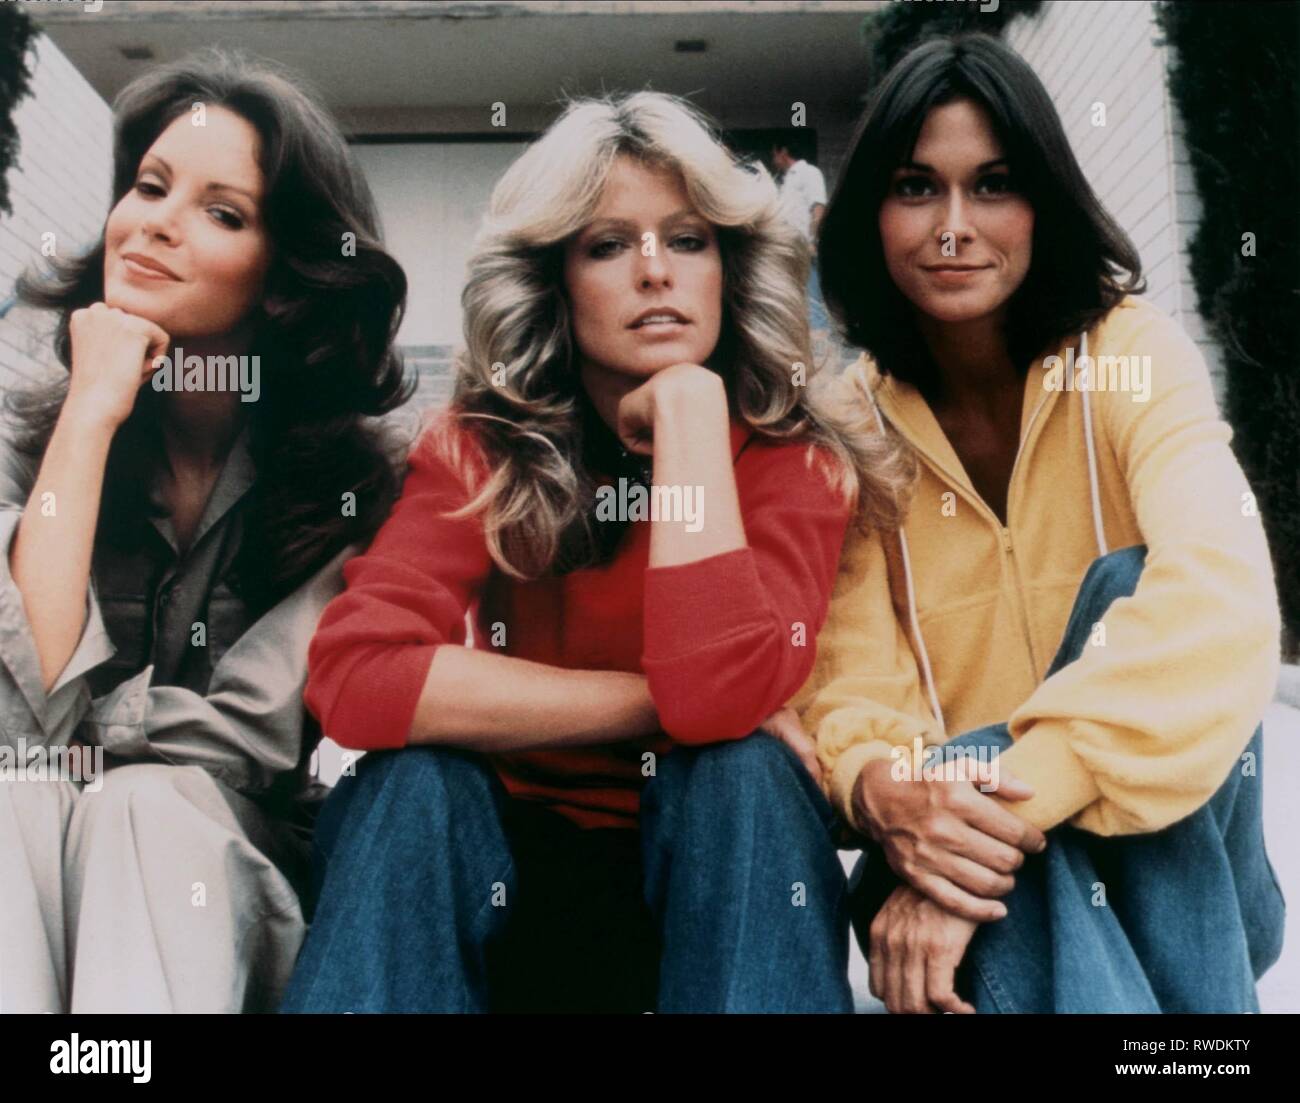 SMITH,FAWCETT, JACKSON, Charlie's Angels, 1976 Banque D'Images